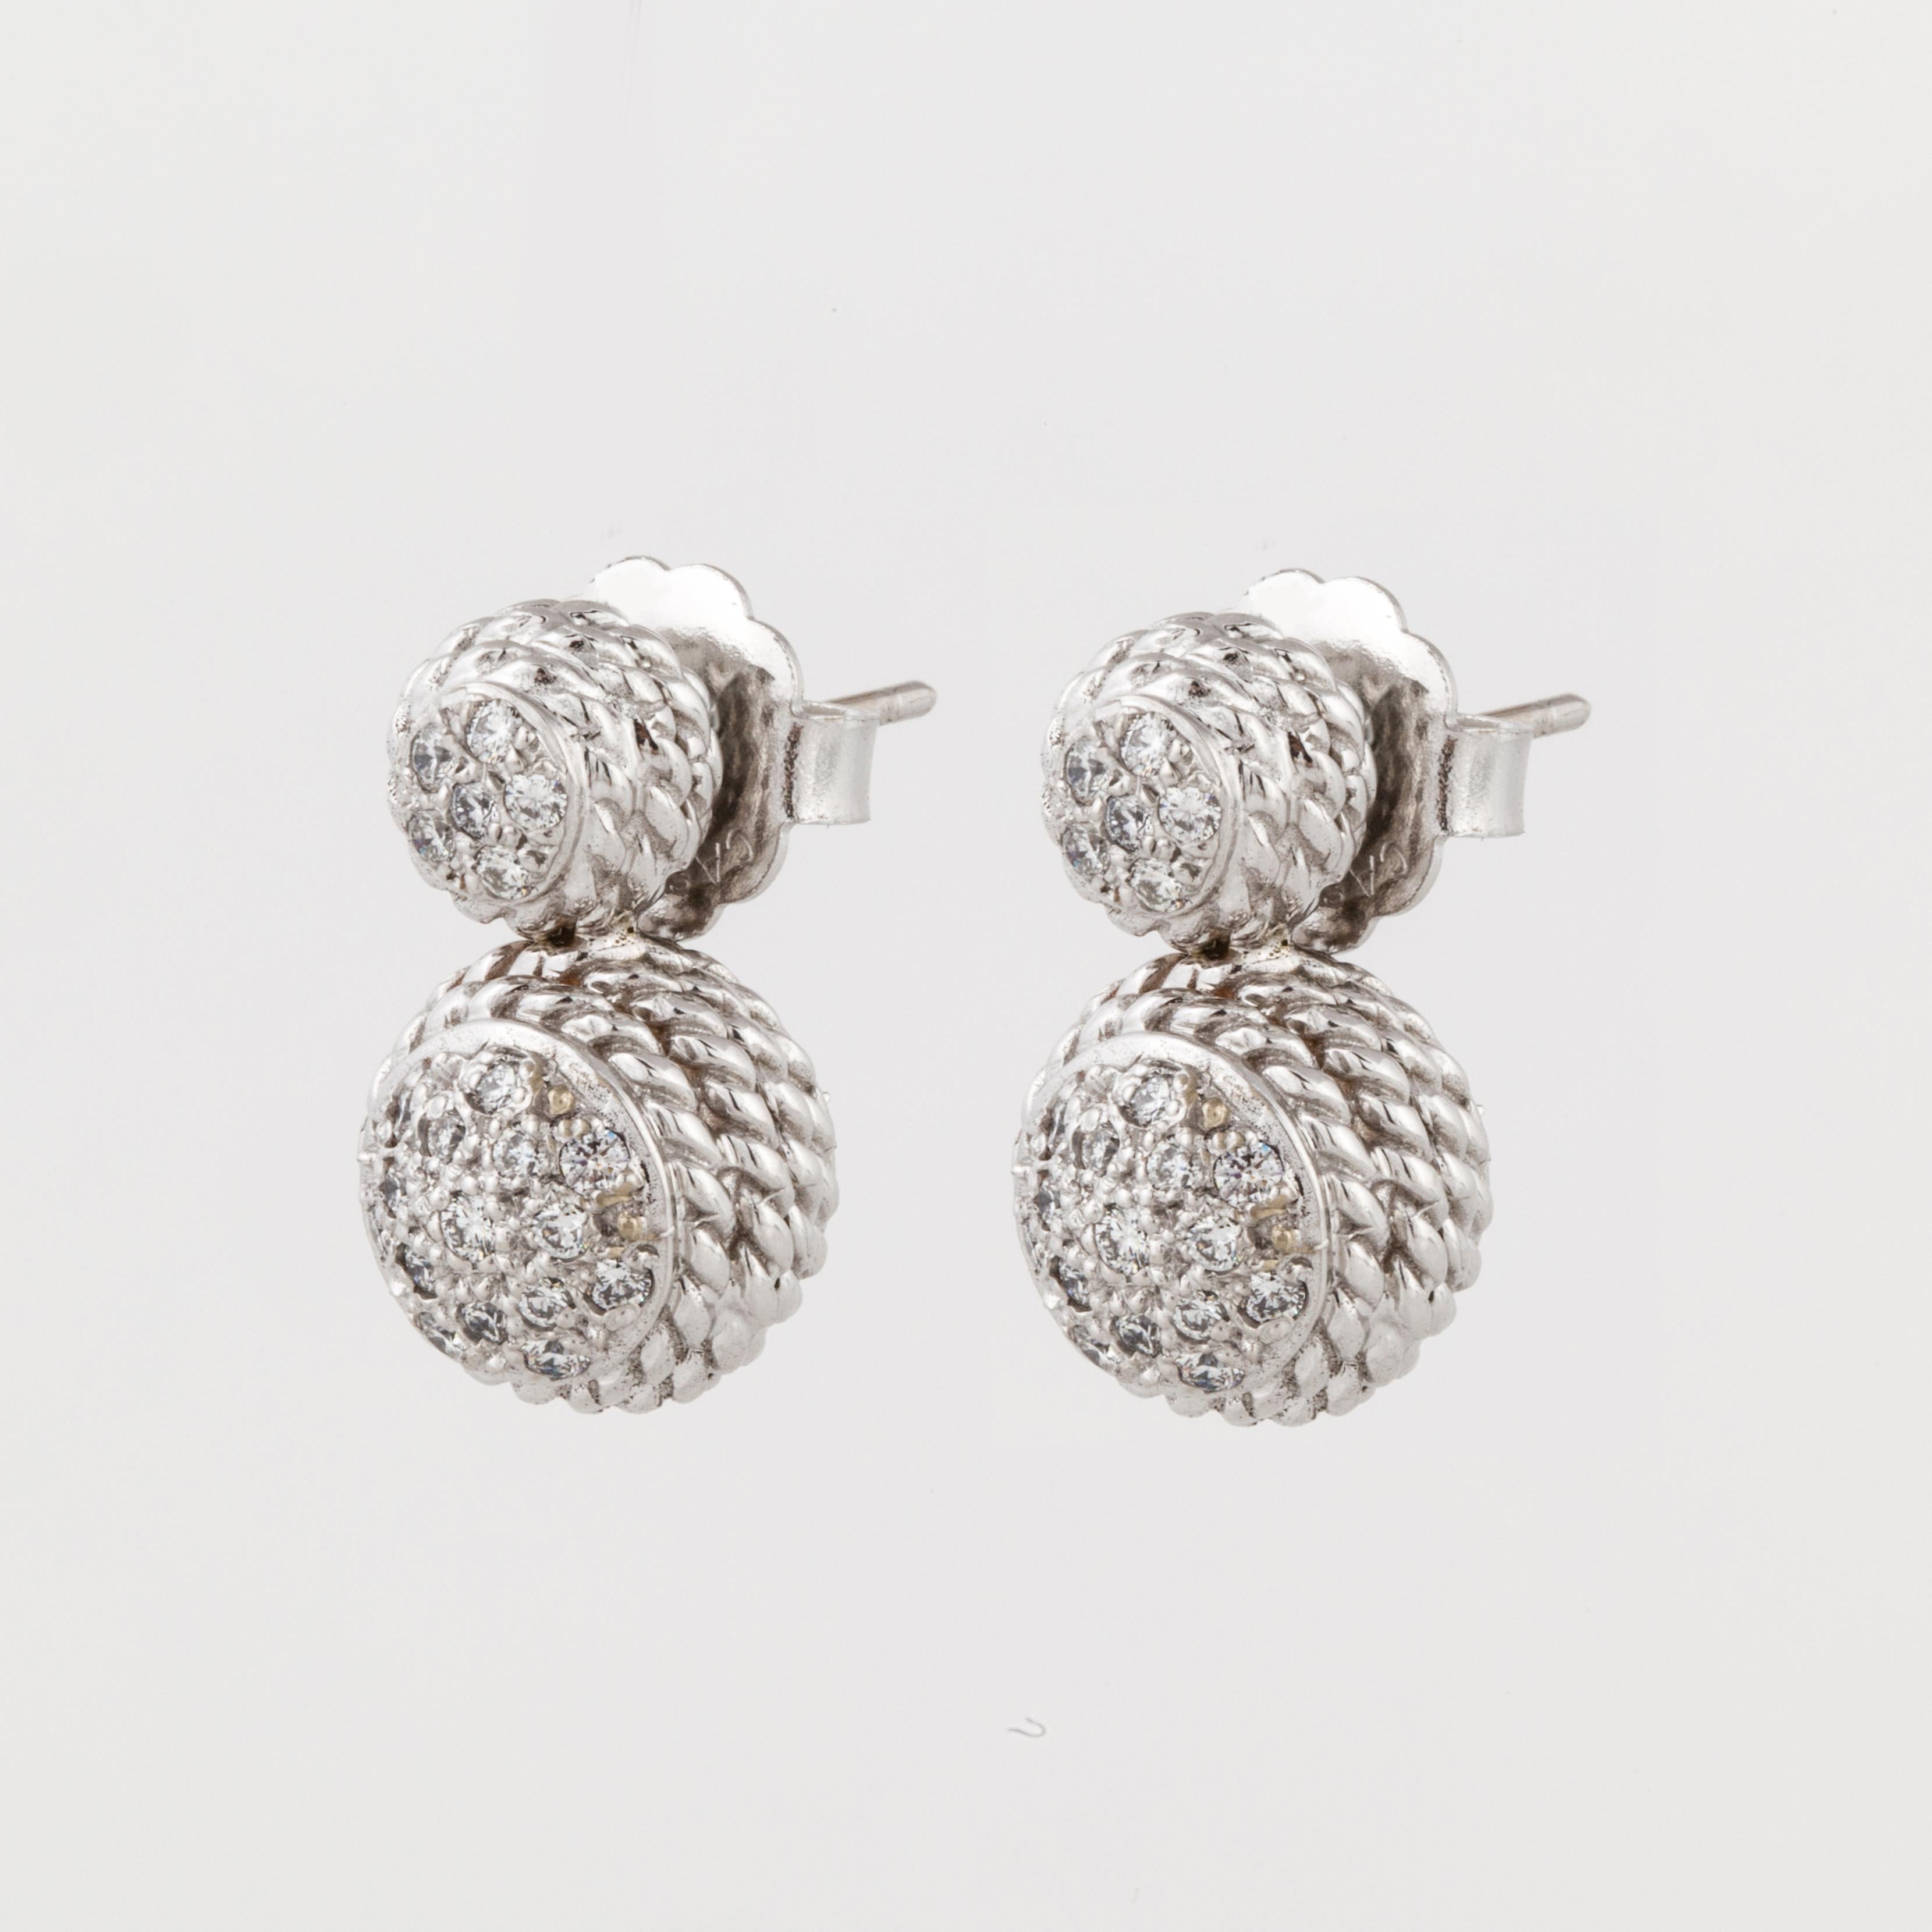 18K white gold earrings by Cassis.  The design features small rope made into spheres and accented with round diamonds. There are seventy-two round diamonds that total 1 carat, G-H color and VS clarity.  They measure 3/4 inches long and 3/8 inches